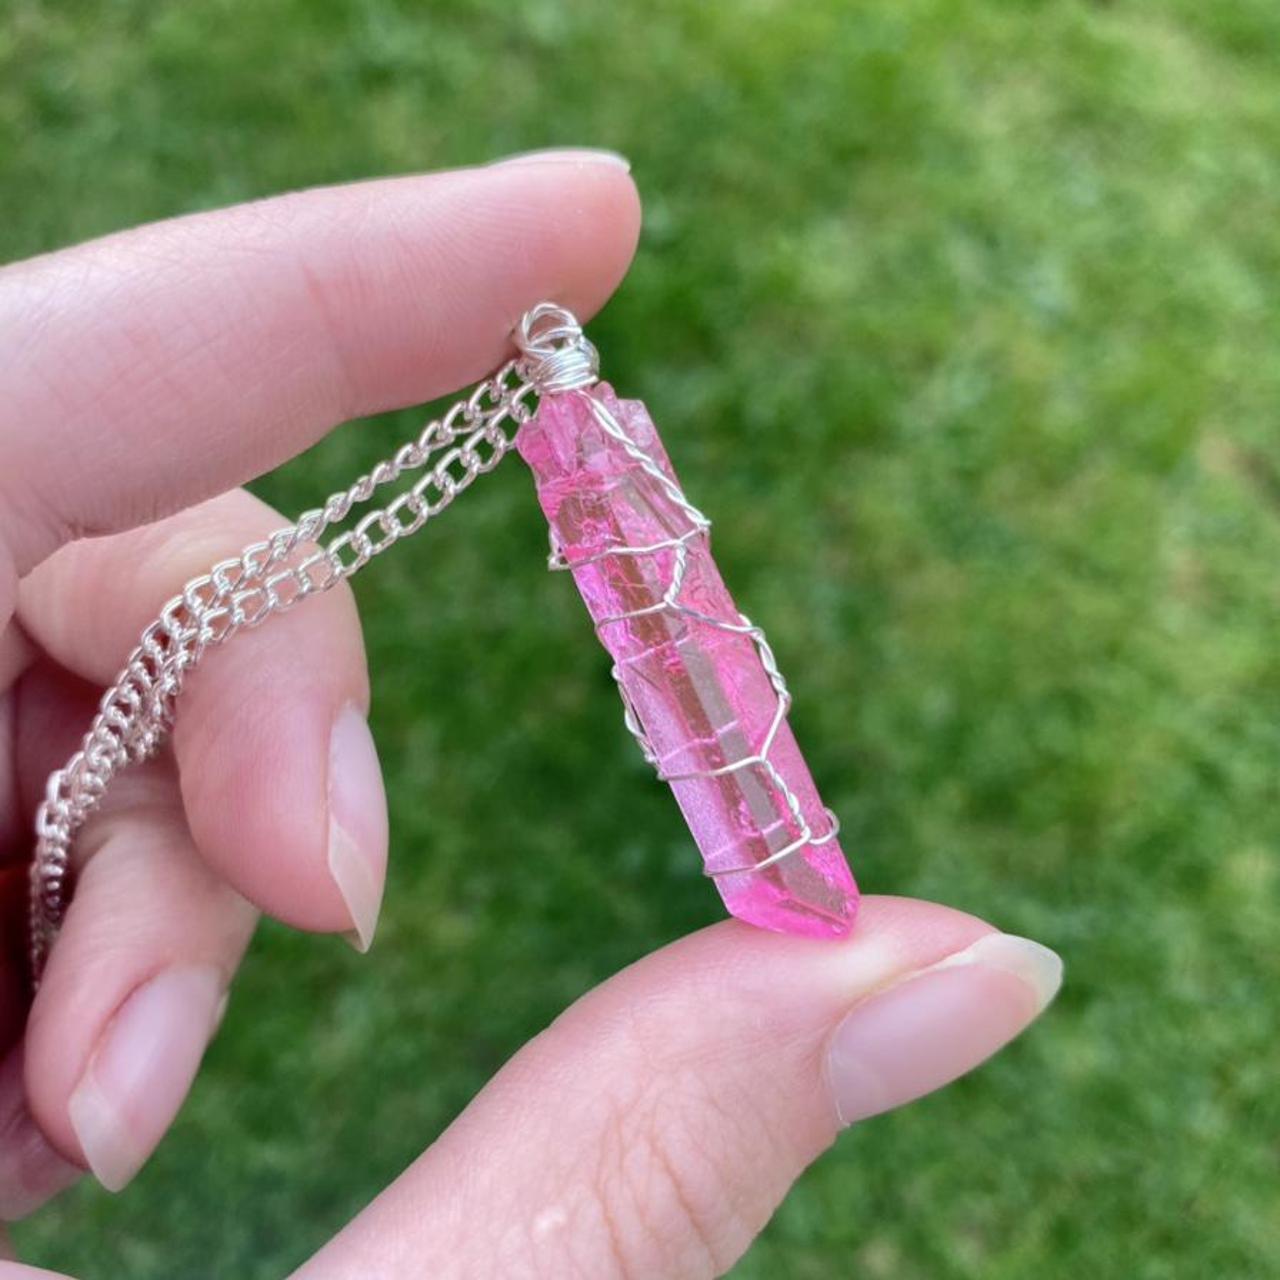 Product Image 4 - Pink crystal quarts shard wrapped